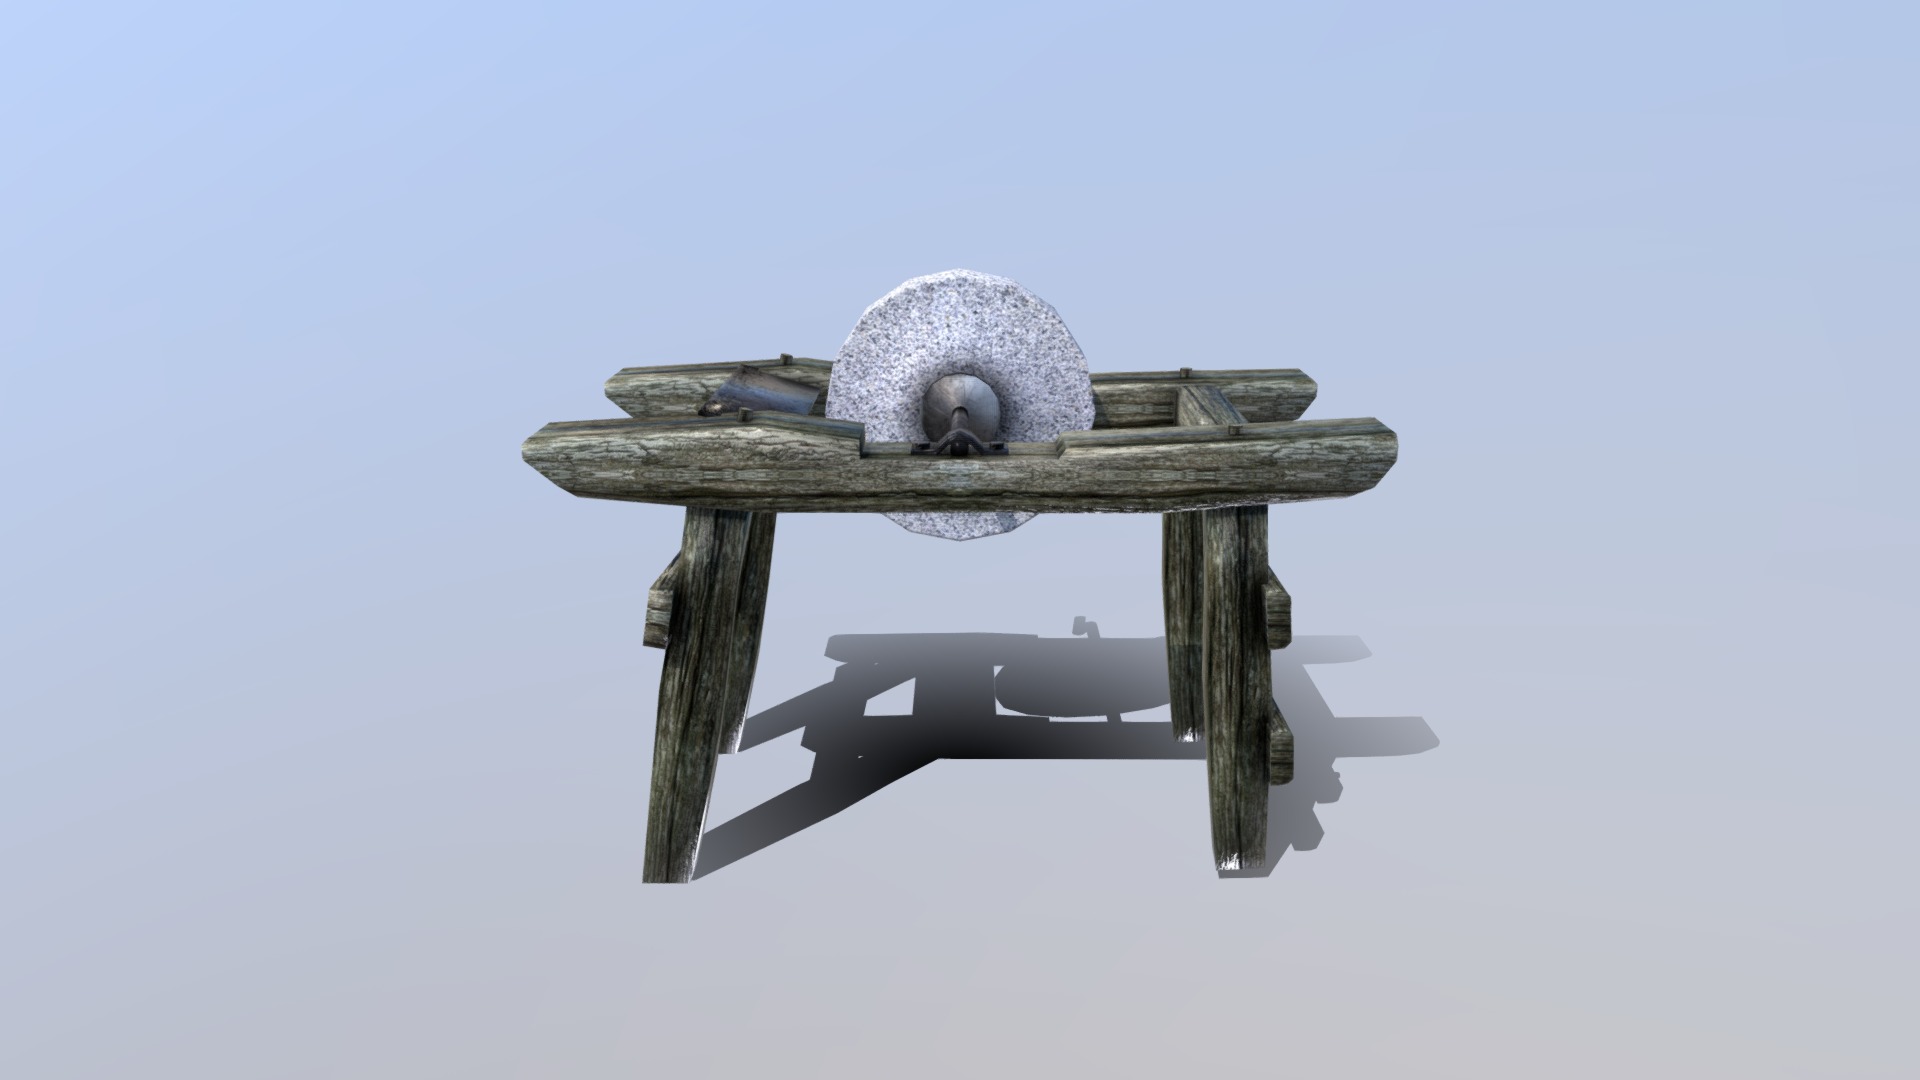 3D model Grindstone - This is a 3D model of the Grindstone. The 3D model is about a round wooden table with a round white ball on top.